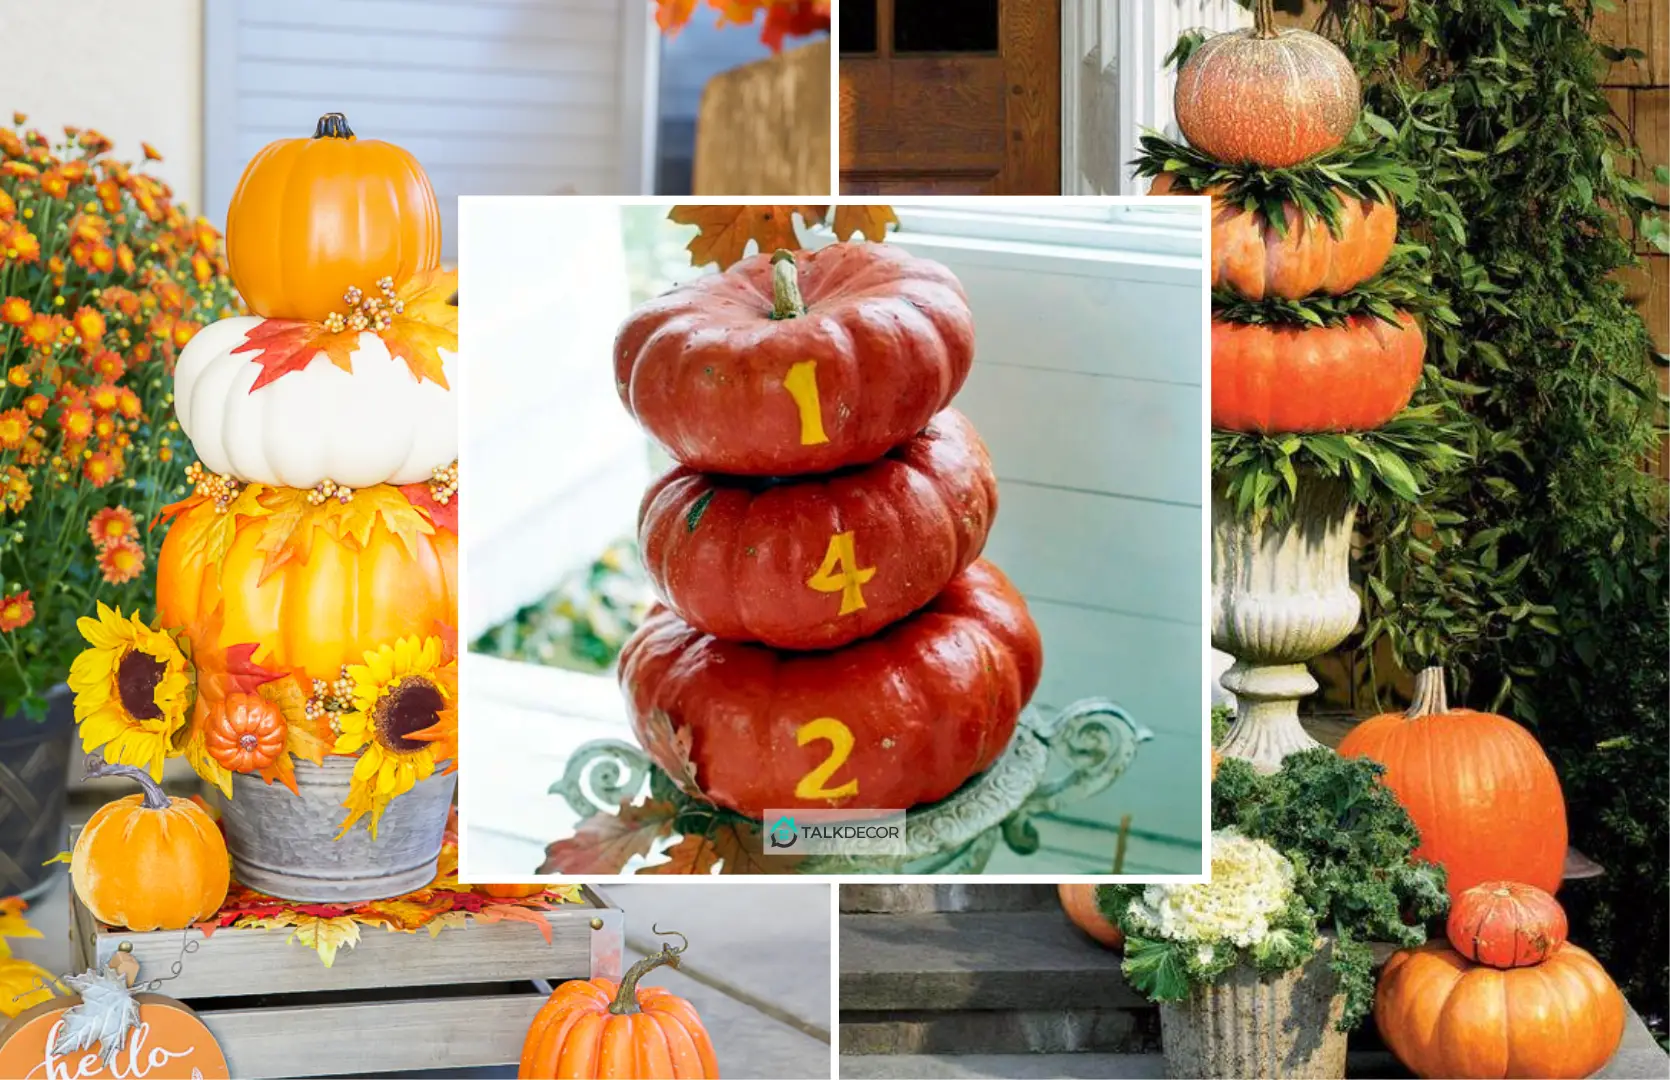 How to Make Tiered Pumpkins for Your Fall Home Decor